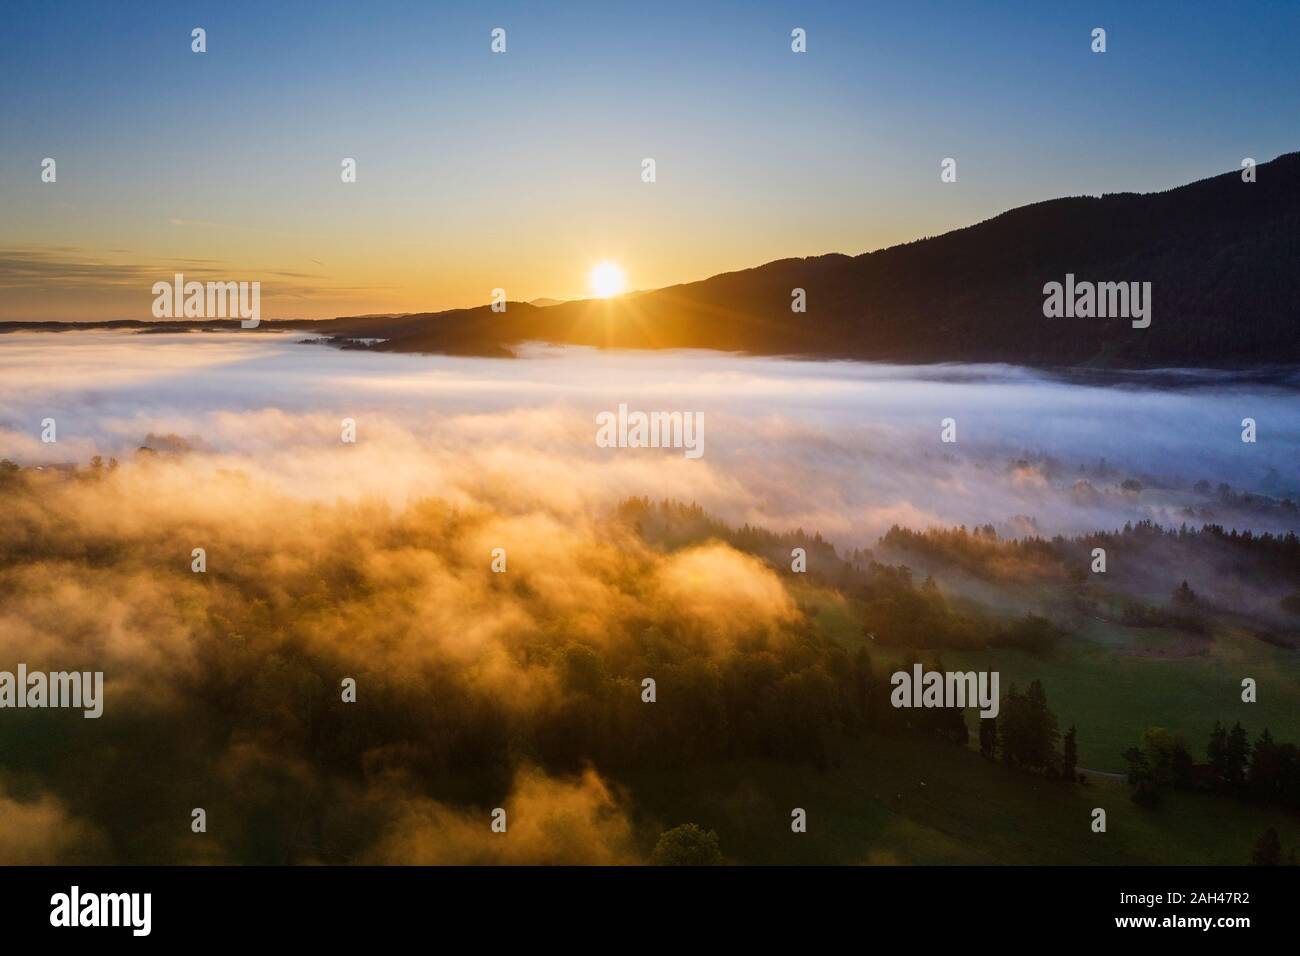 Germany, Upper Bavaria, Gaissach, Aerial view of fog above landscape at sunrise Stock Photo